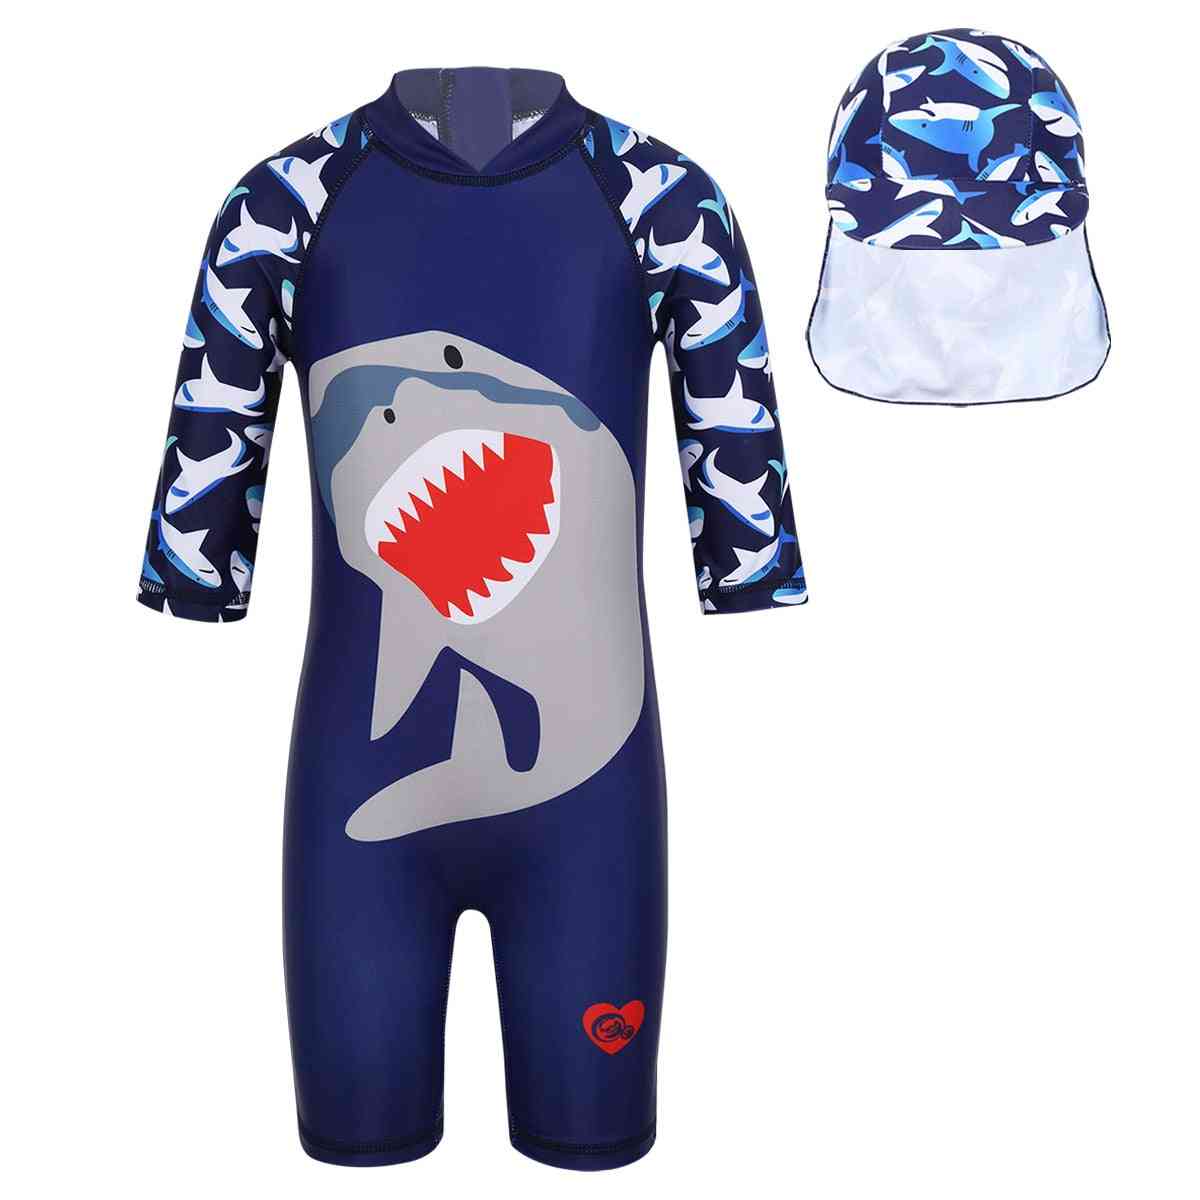 Boys Surfing Swimwear Shark Pattern Printed Suit With Swimming Cap